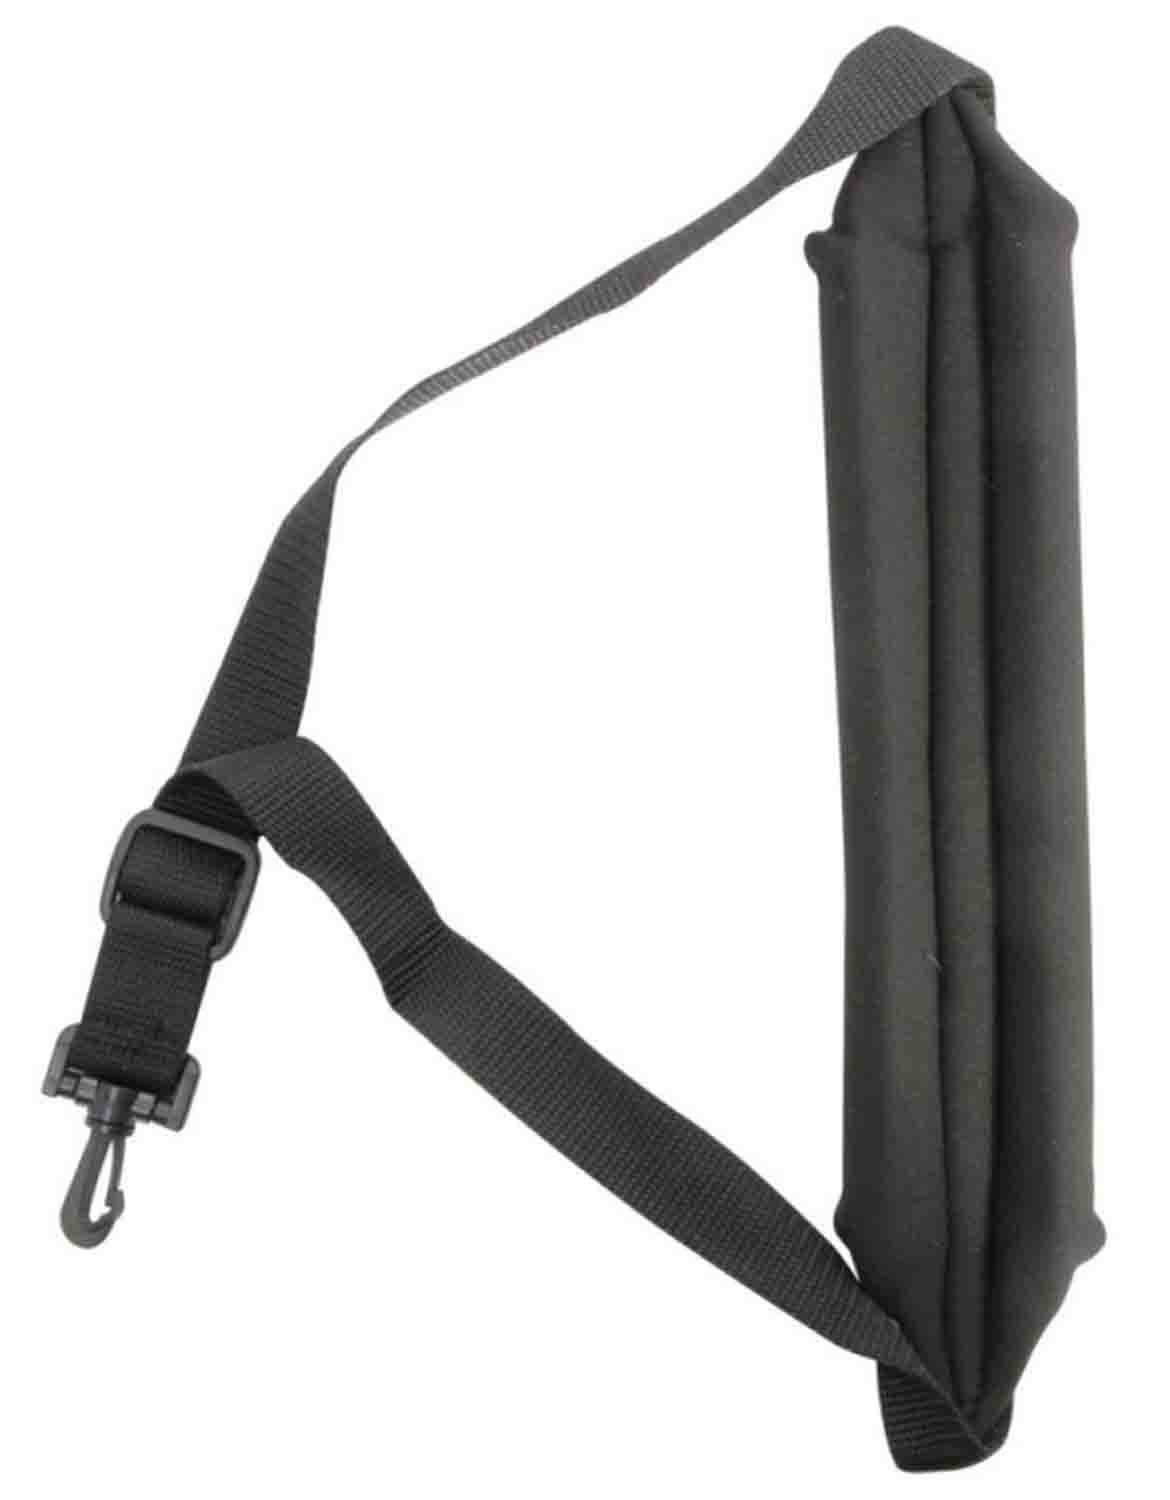 OnStage SPS5000 Deluxe Foam-Padded Strap for Saxophone - Black - Hollywood DJ